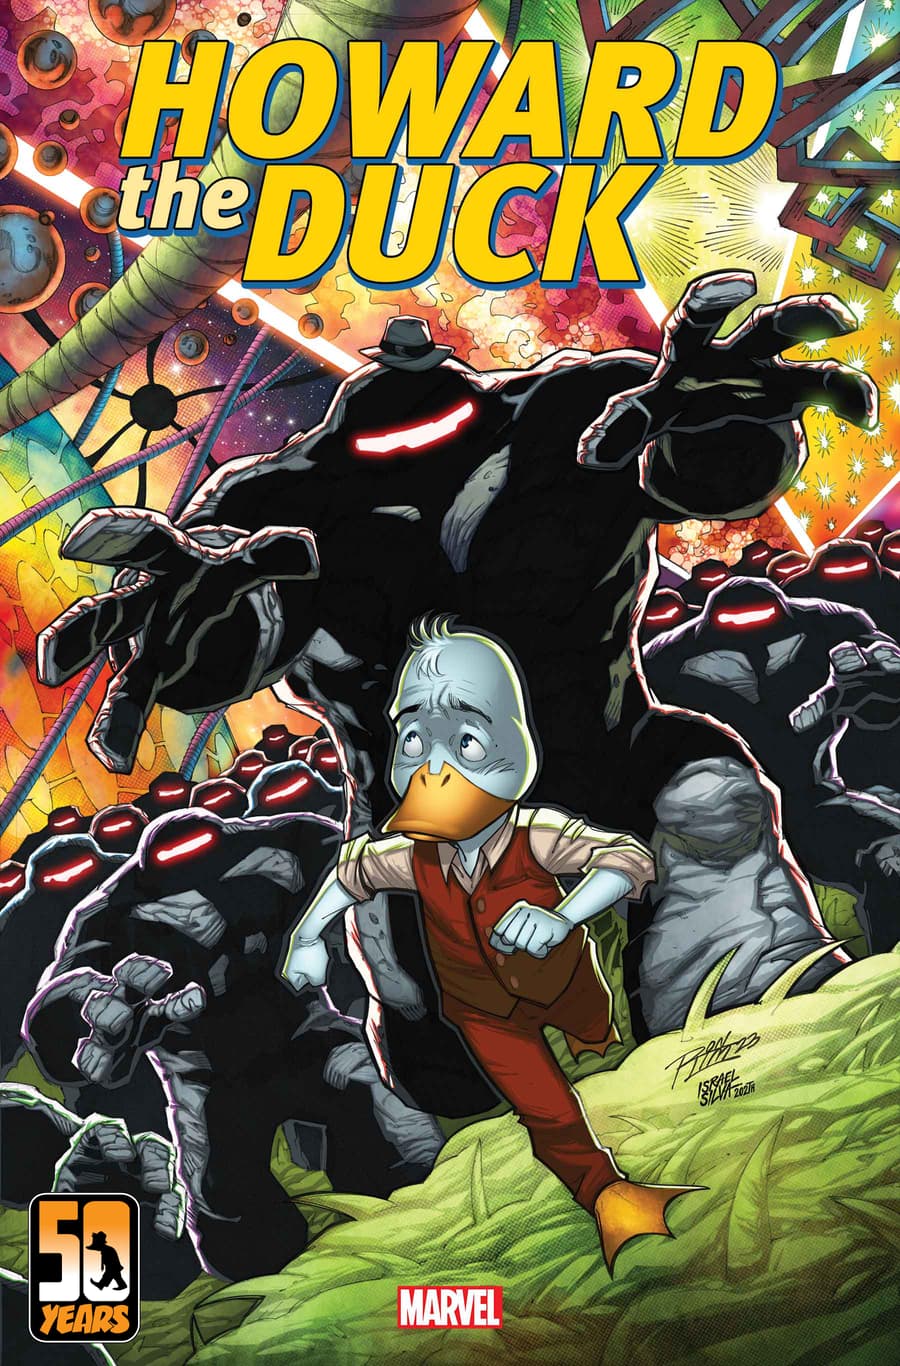 Howard the Duck #1 by Ron Lim